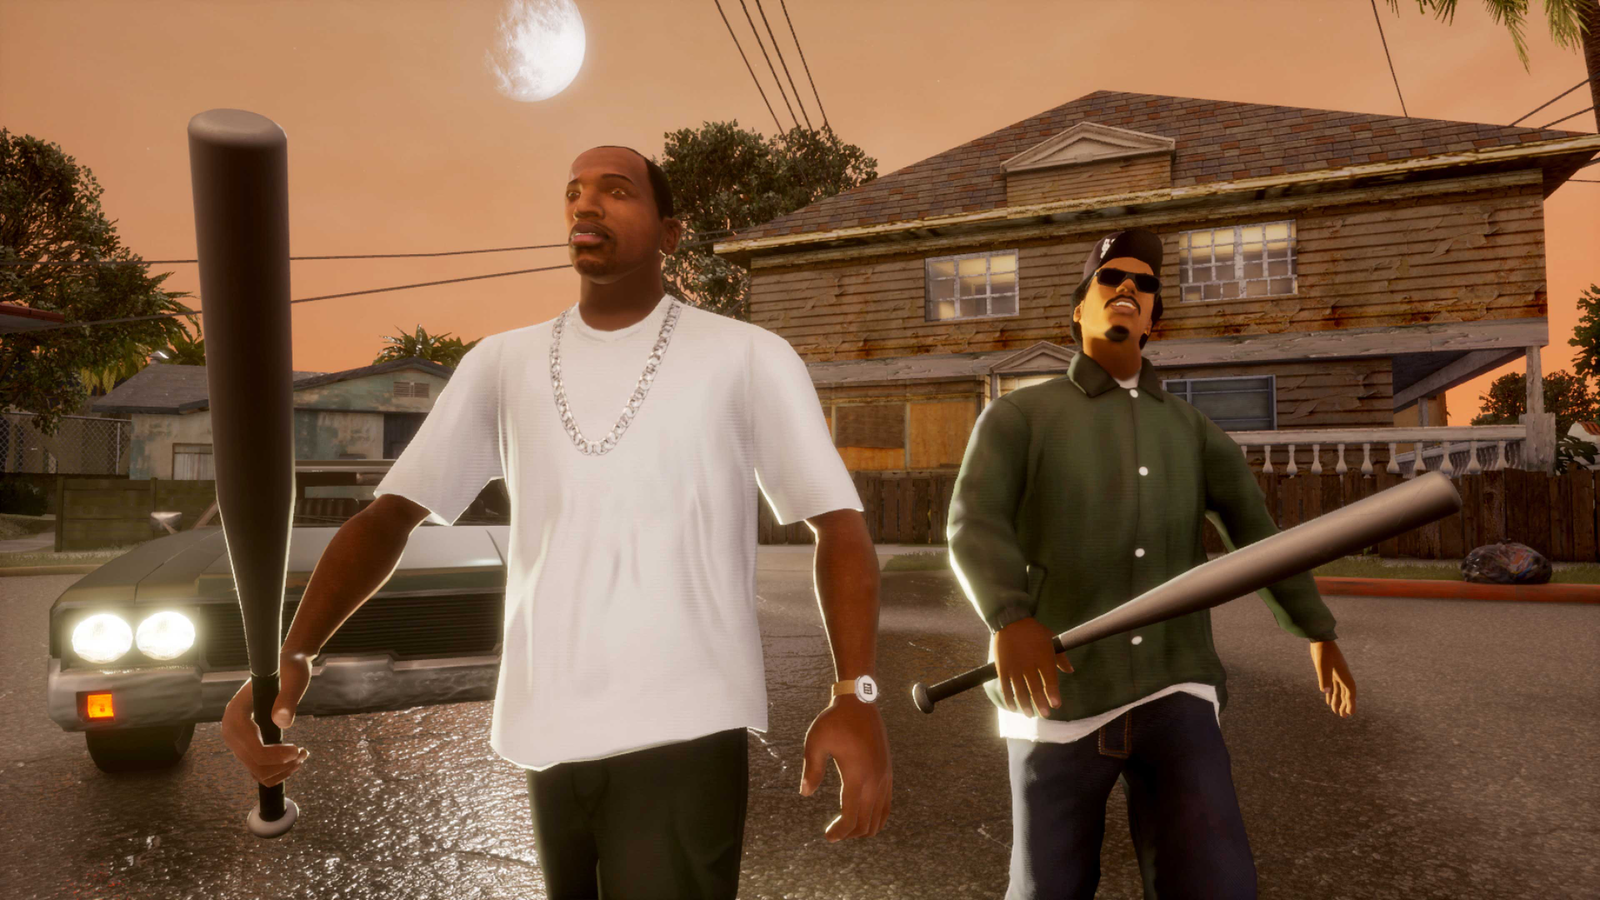 GTA San Andreas PS2 Features Mod Preview 